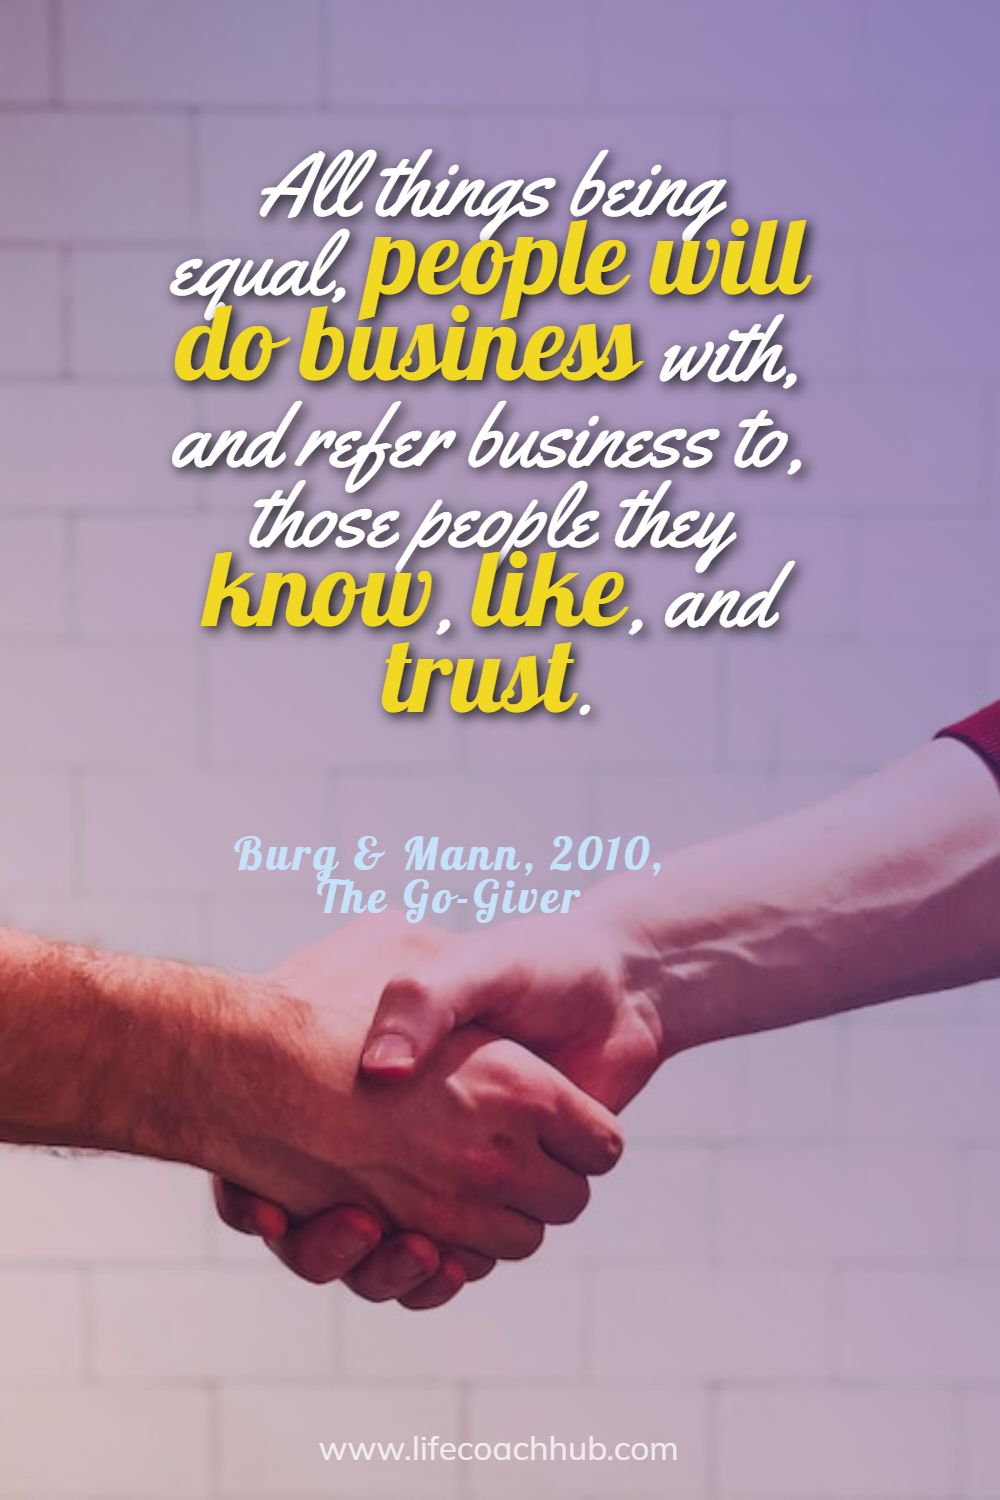 All things being equal, people will do business with and refer business to, those people they know, like and trust. Burg & Mann, 2010, The Go-Giver Coaching Quote